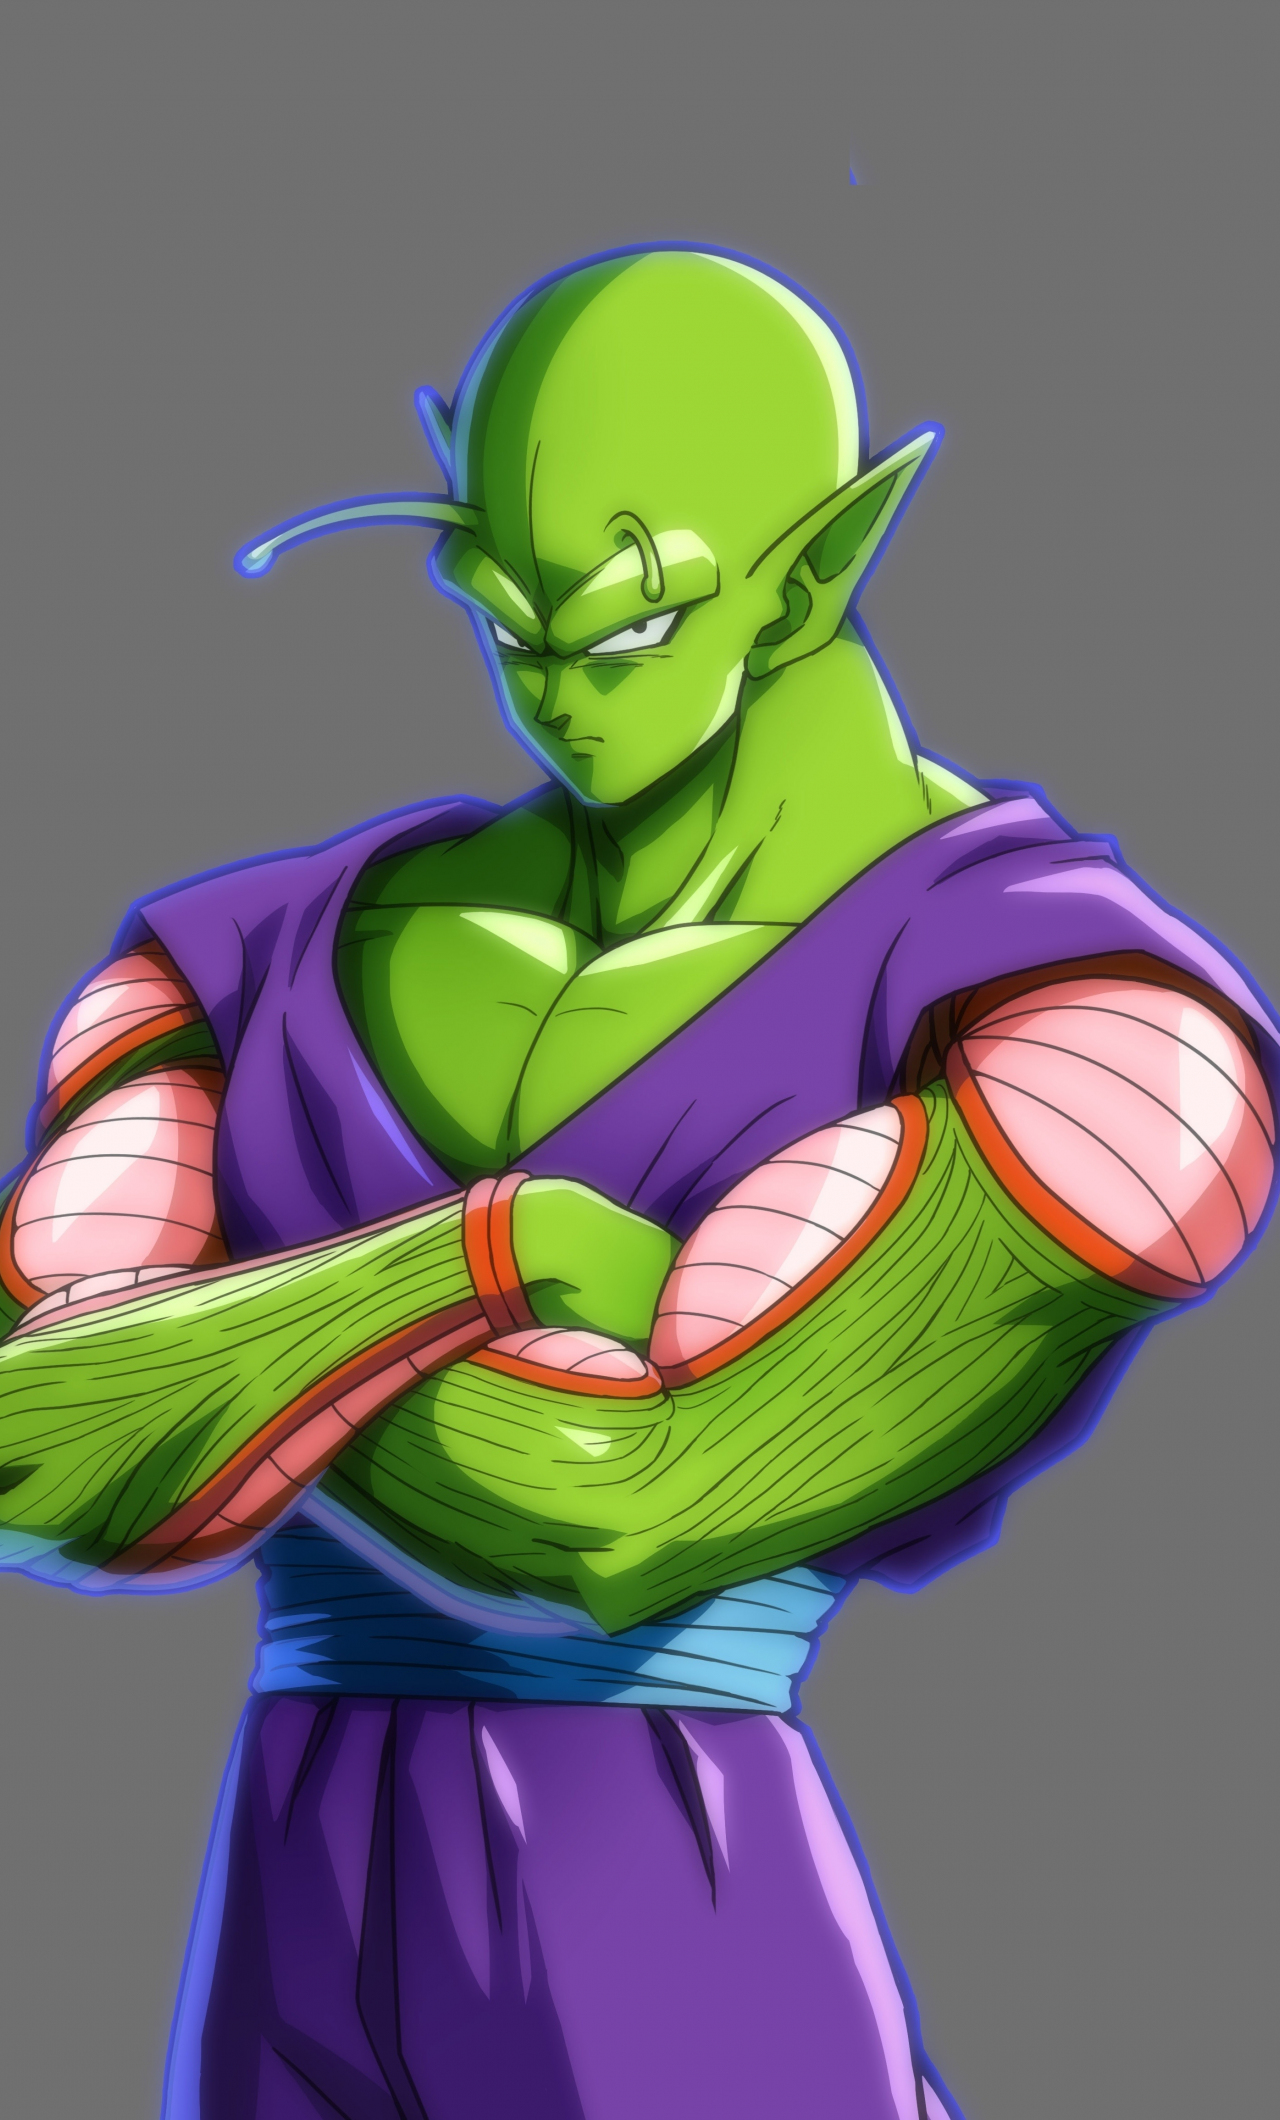 Download Piccolo Dragon Ball Fighterz Video Game Anime 1280x21 Wallpaper Iphone 6 Plus 1280x21 Hd Image Background 6249